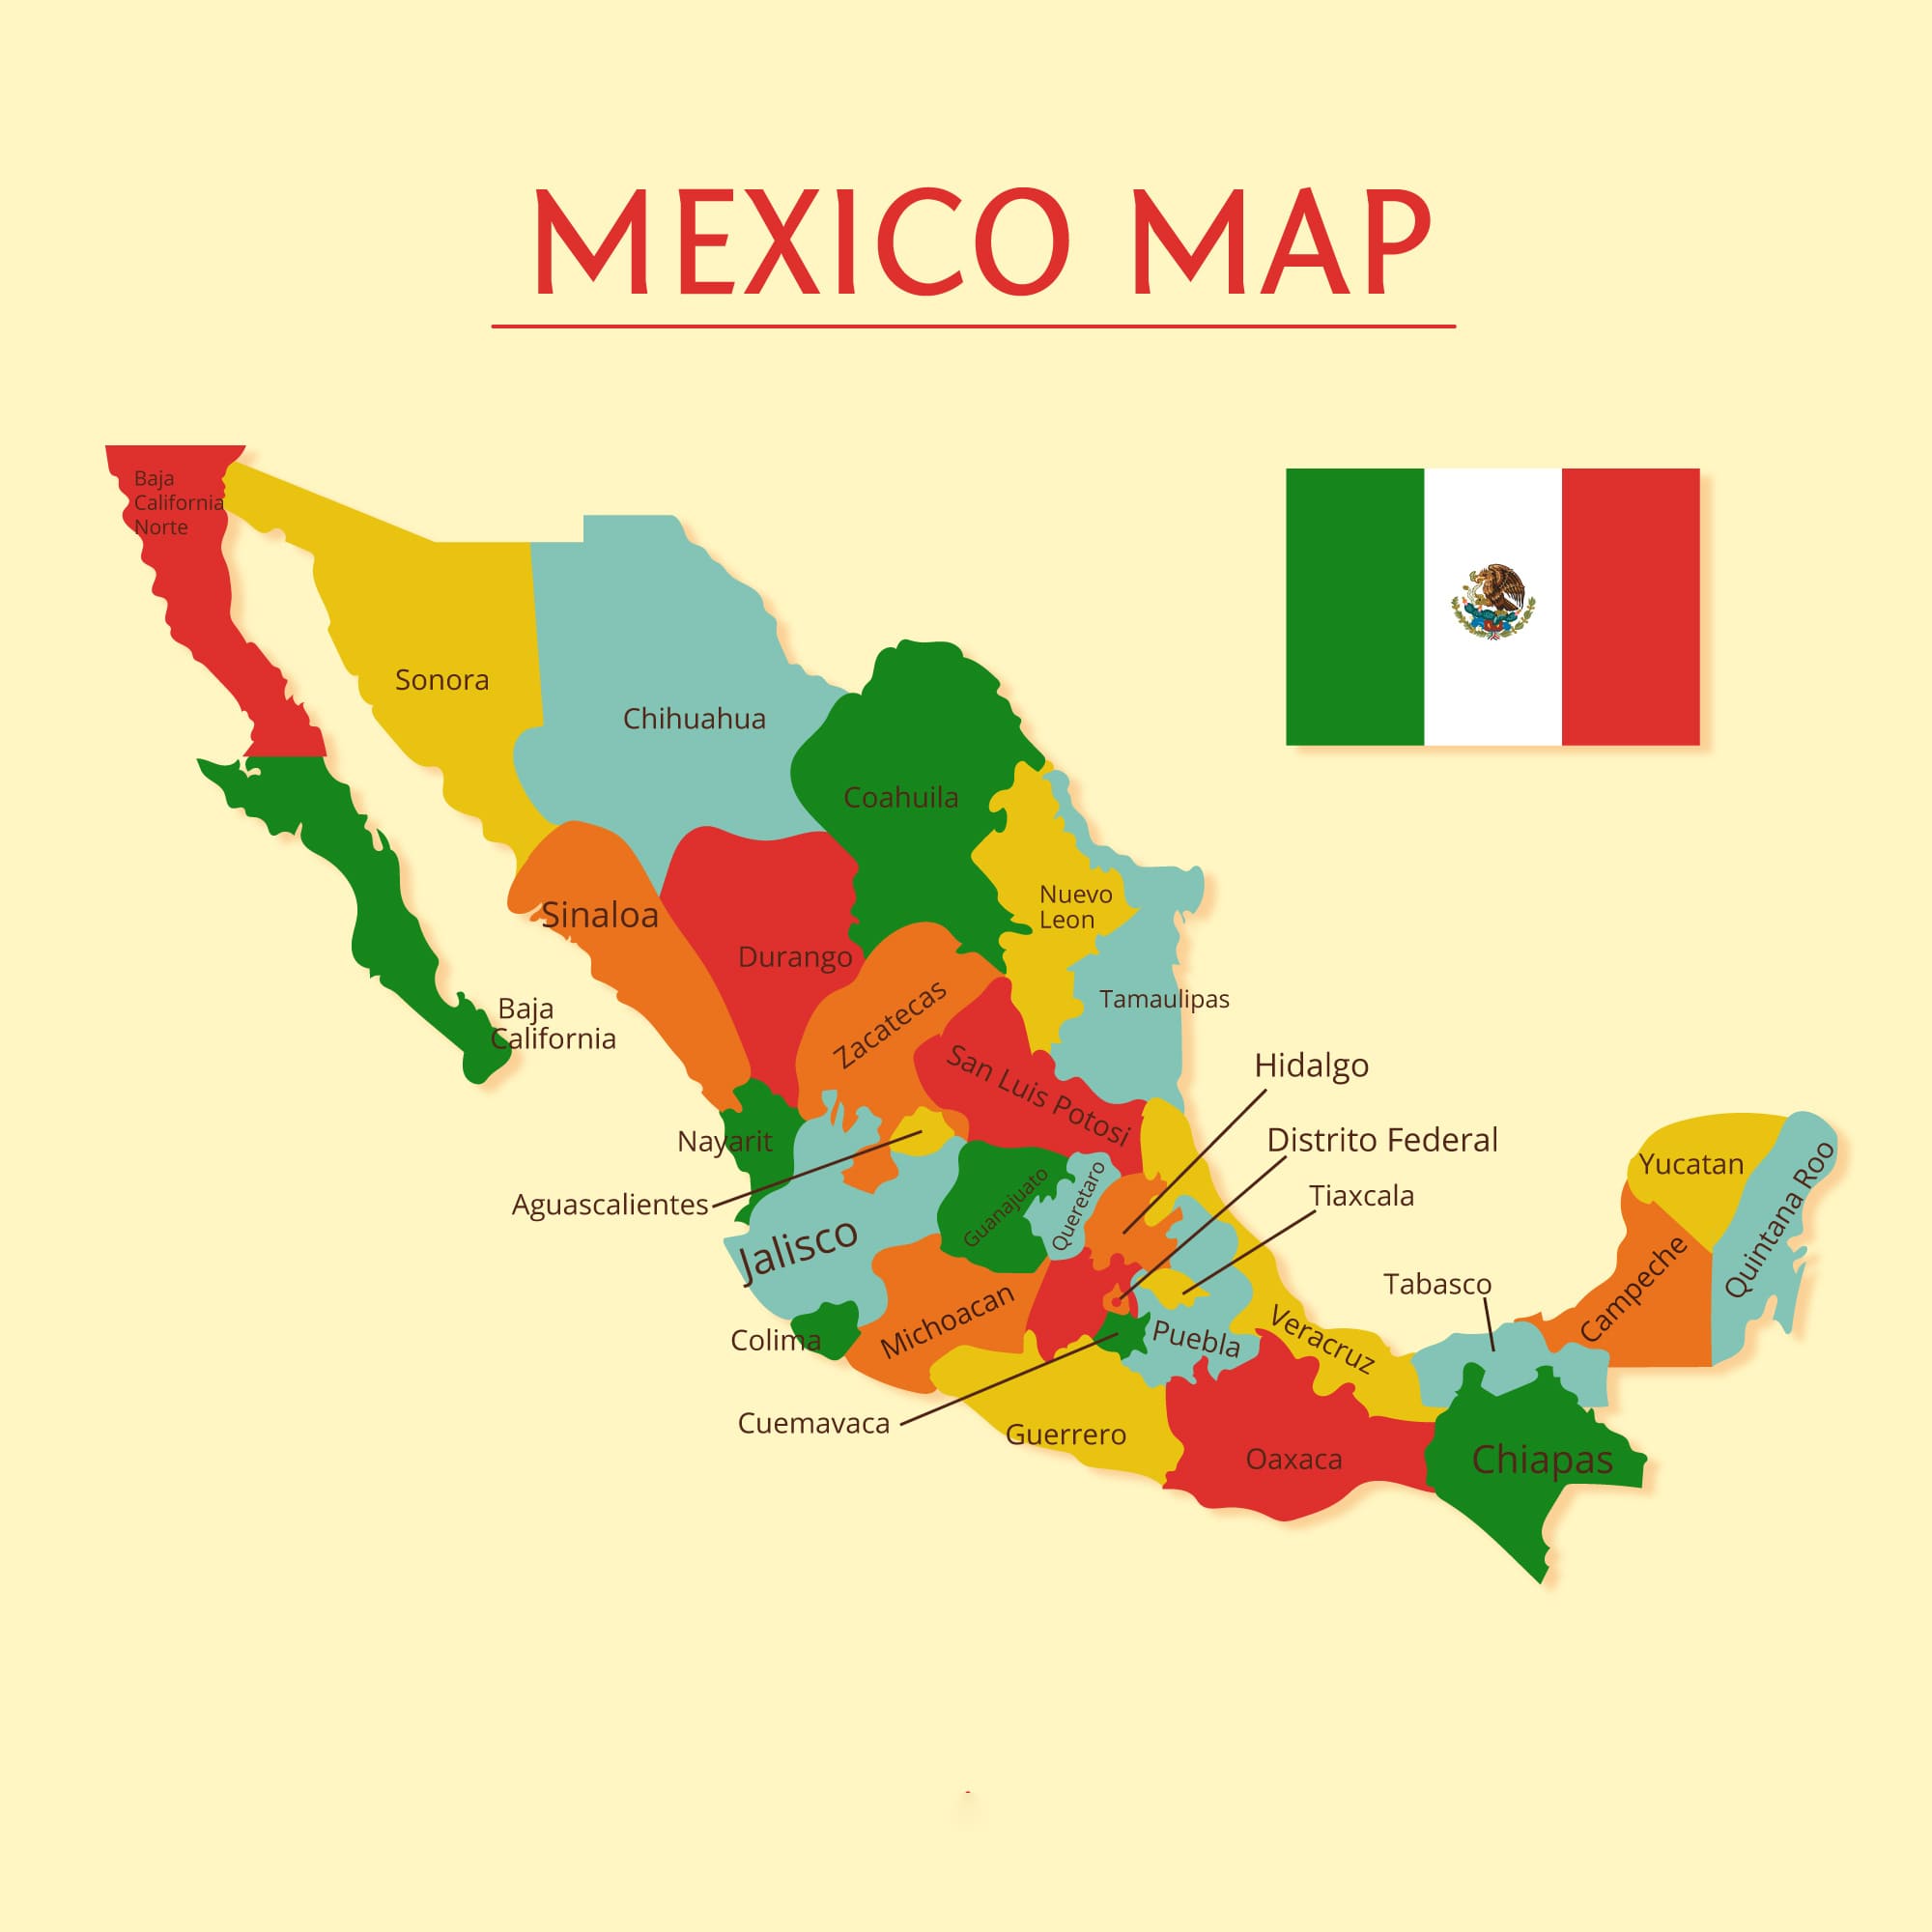 How Many States Does Mexico Have?